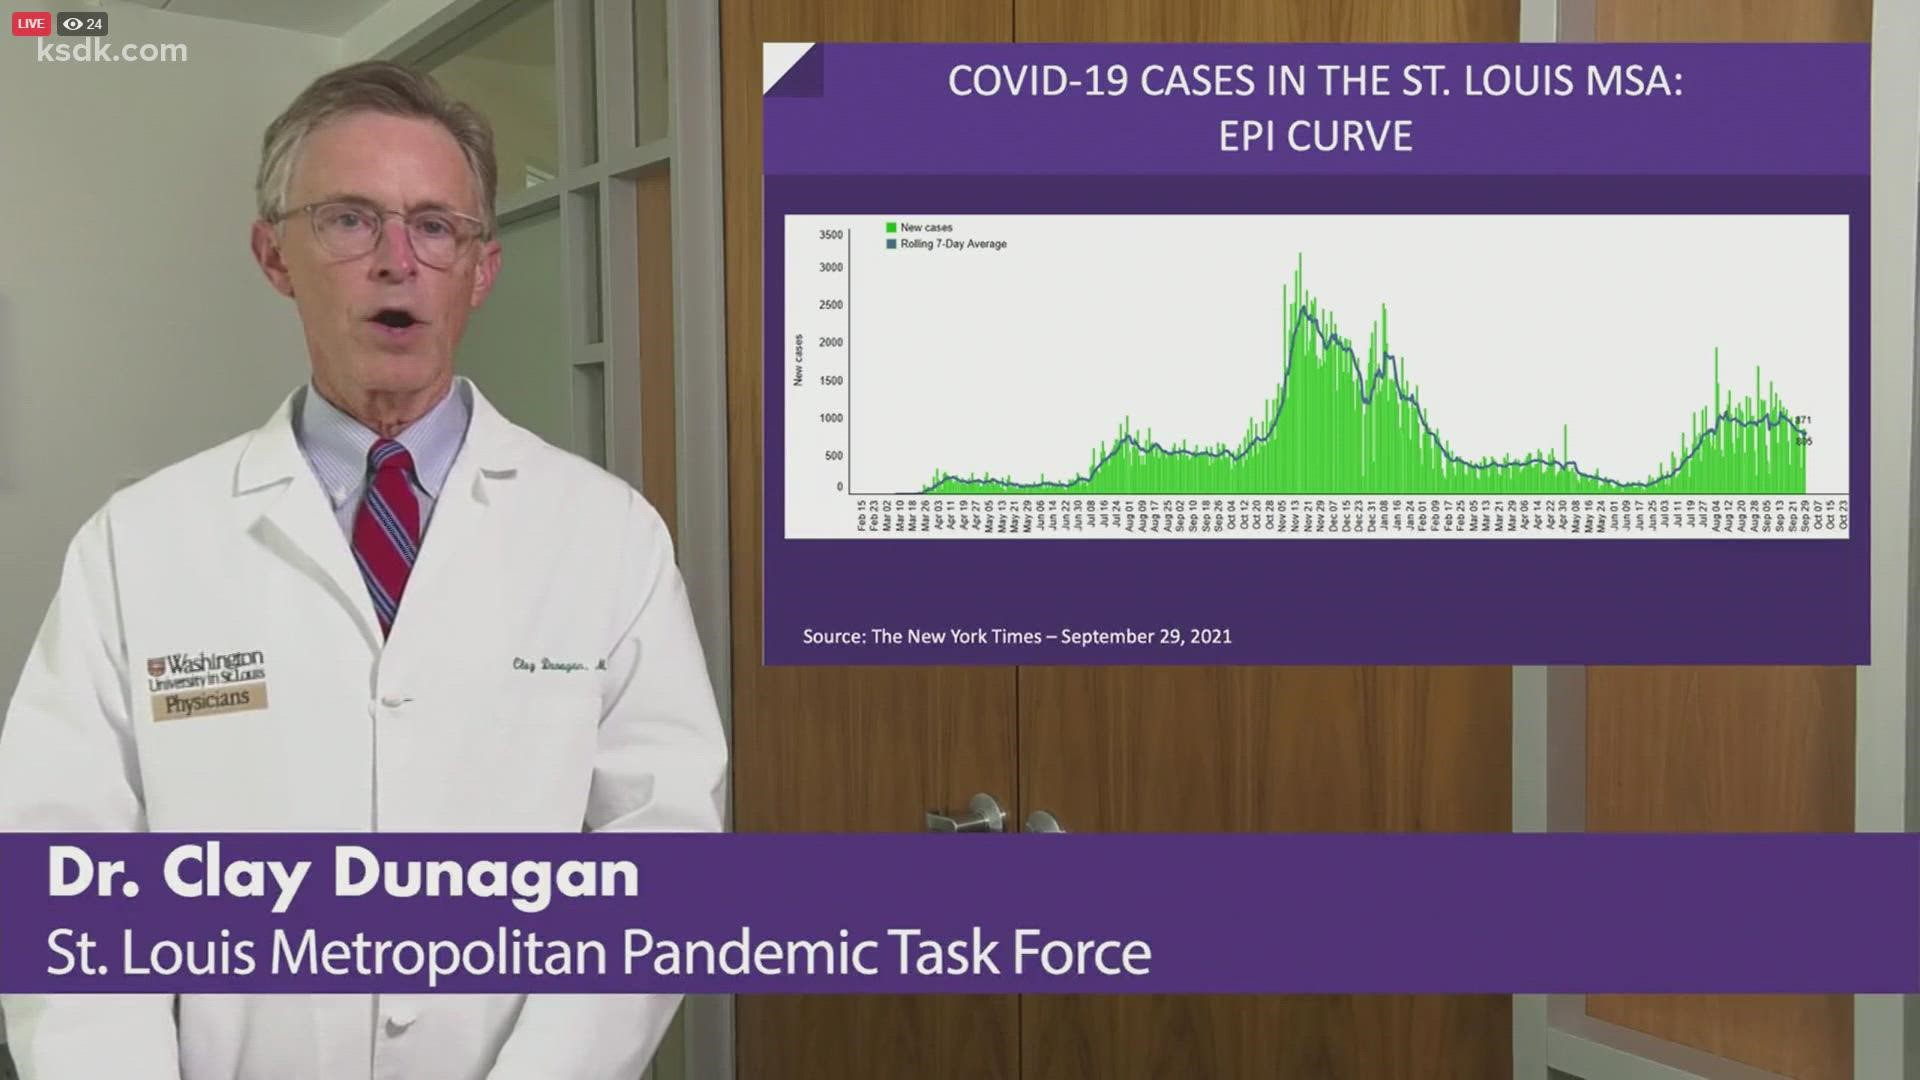 St. Louis Metropolitan Pandemic Task Force leader Dr. Clay Dunagan will discuss booster recommendations, ivermectin, masking and hospital data.